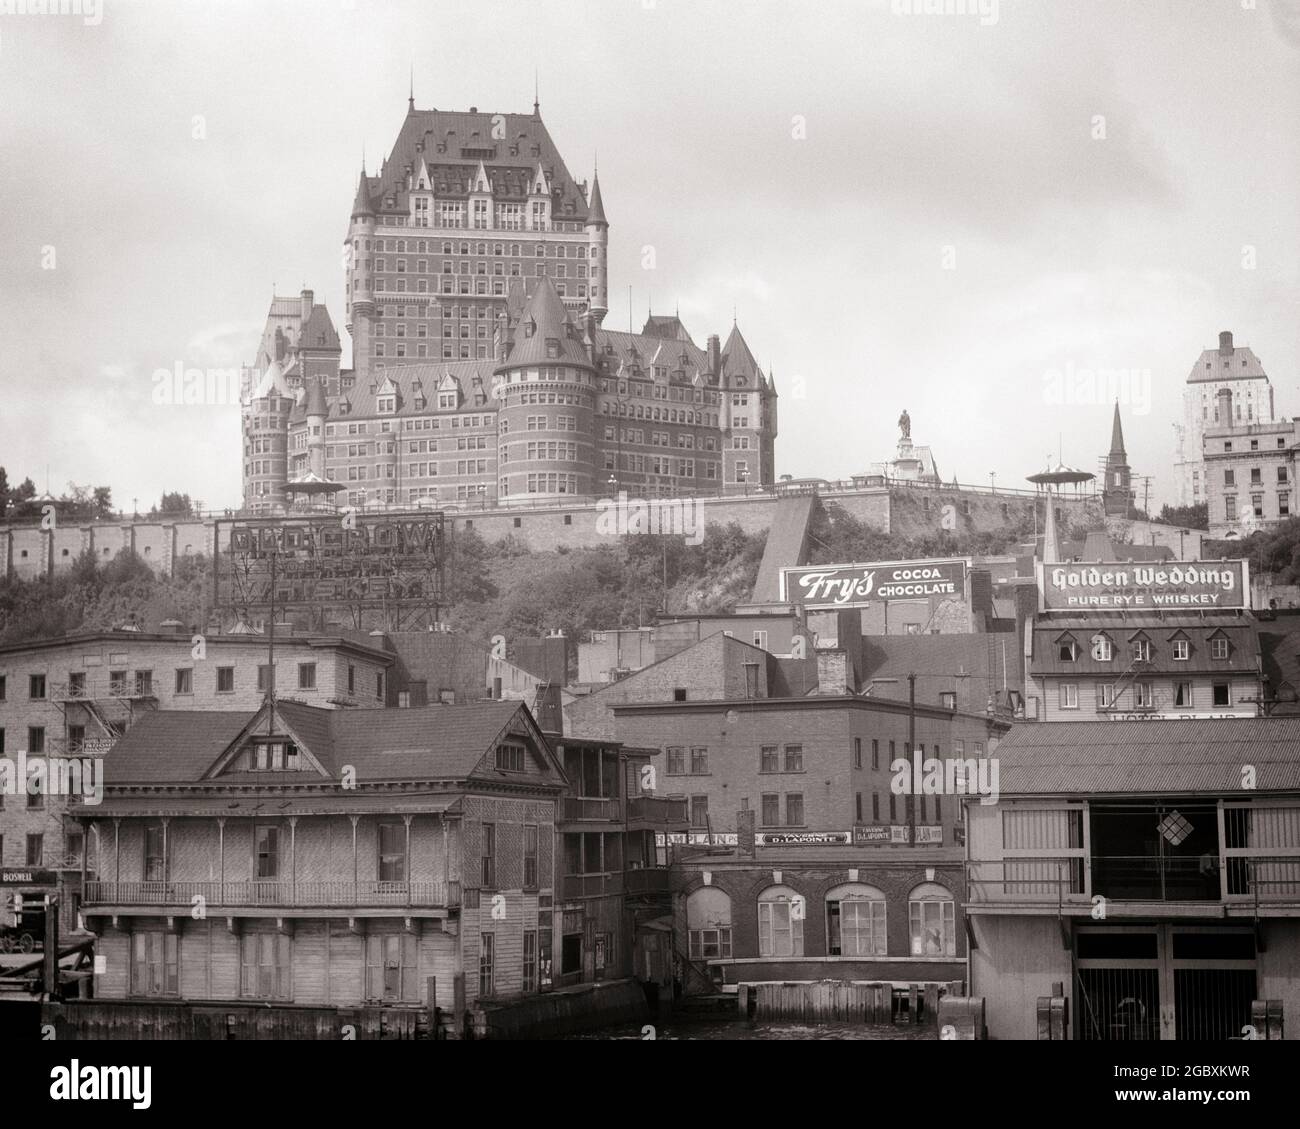 1930s CHATEAU FRONTENAC OPENED 1893 CANADIAN PACIFIC RAILWAY NATIONAL HISTORIC SITE CHÂTEAUESQUE STYLE HOTEL QUEBEC CITY CANADA - r4976 HAR001 HARS OLD FASHIONED Stock Photo